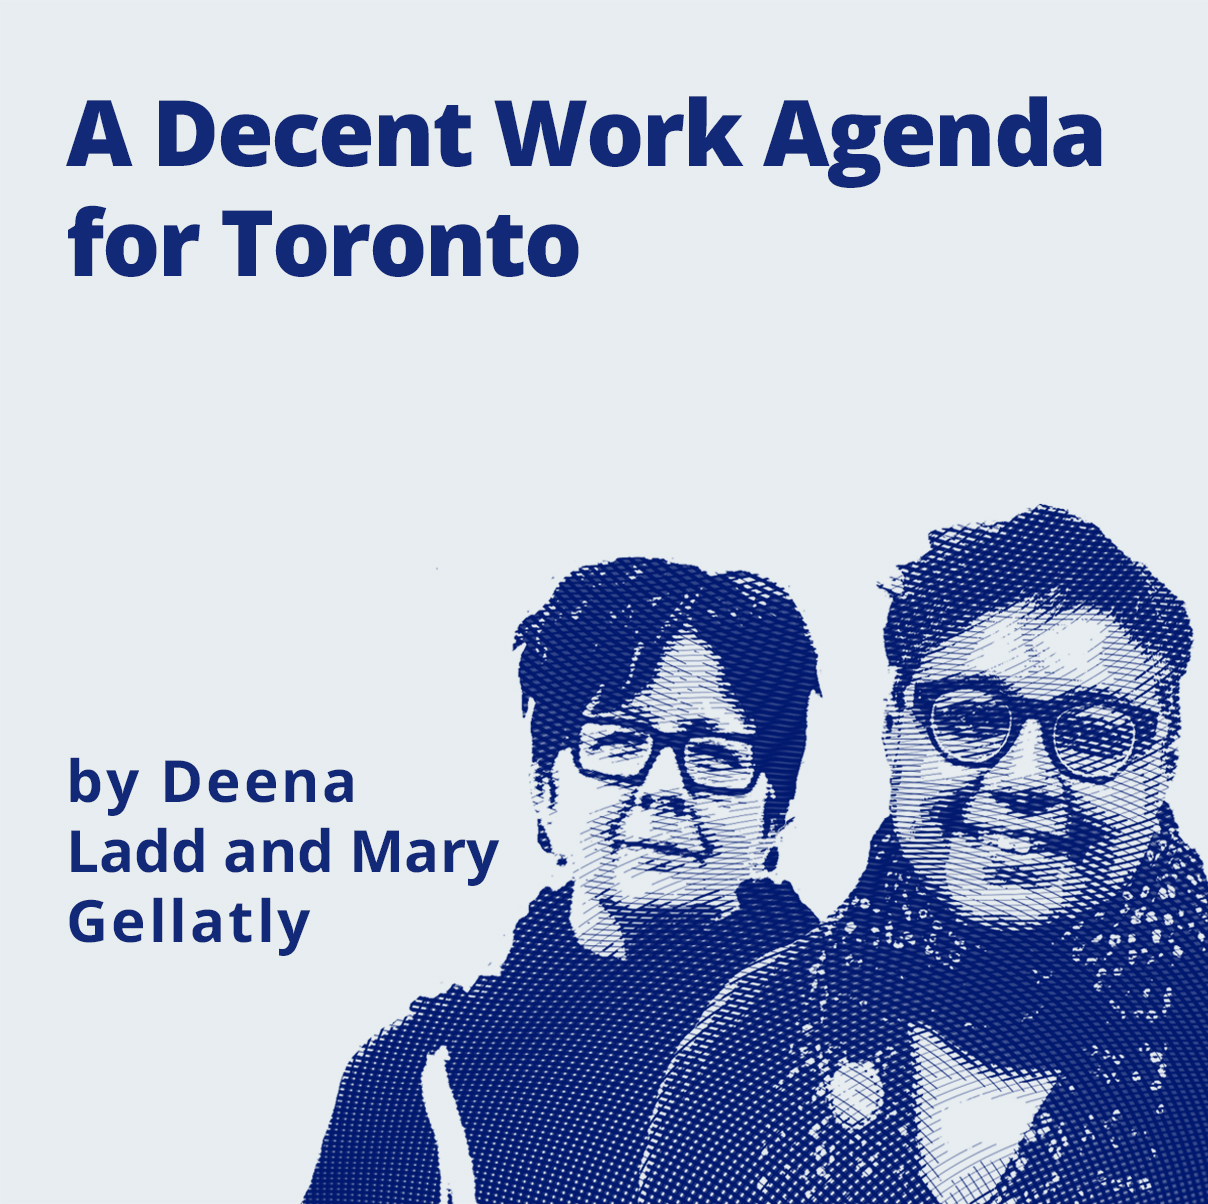 RA Decent Work Agenda for Toronto page by Deena Ladd and Mary Gellatly